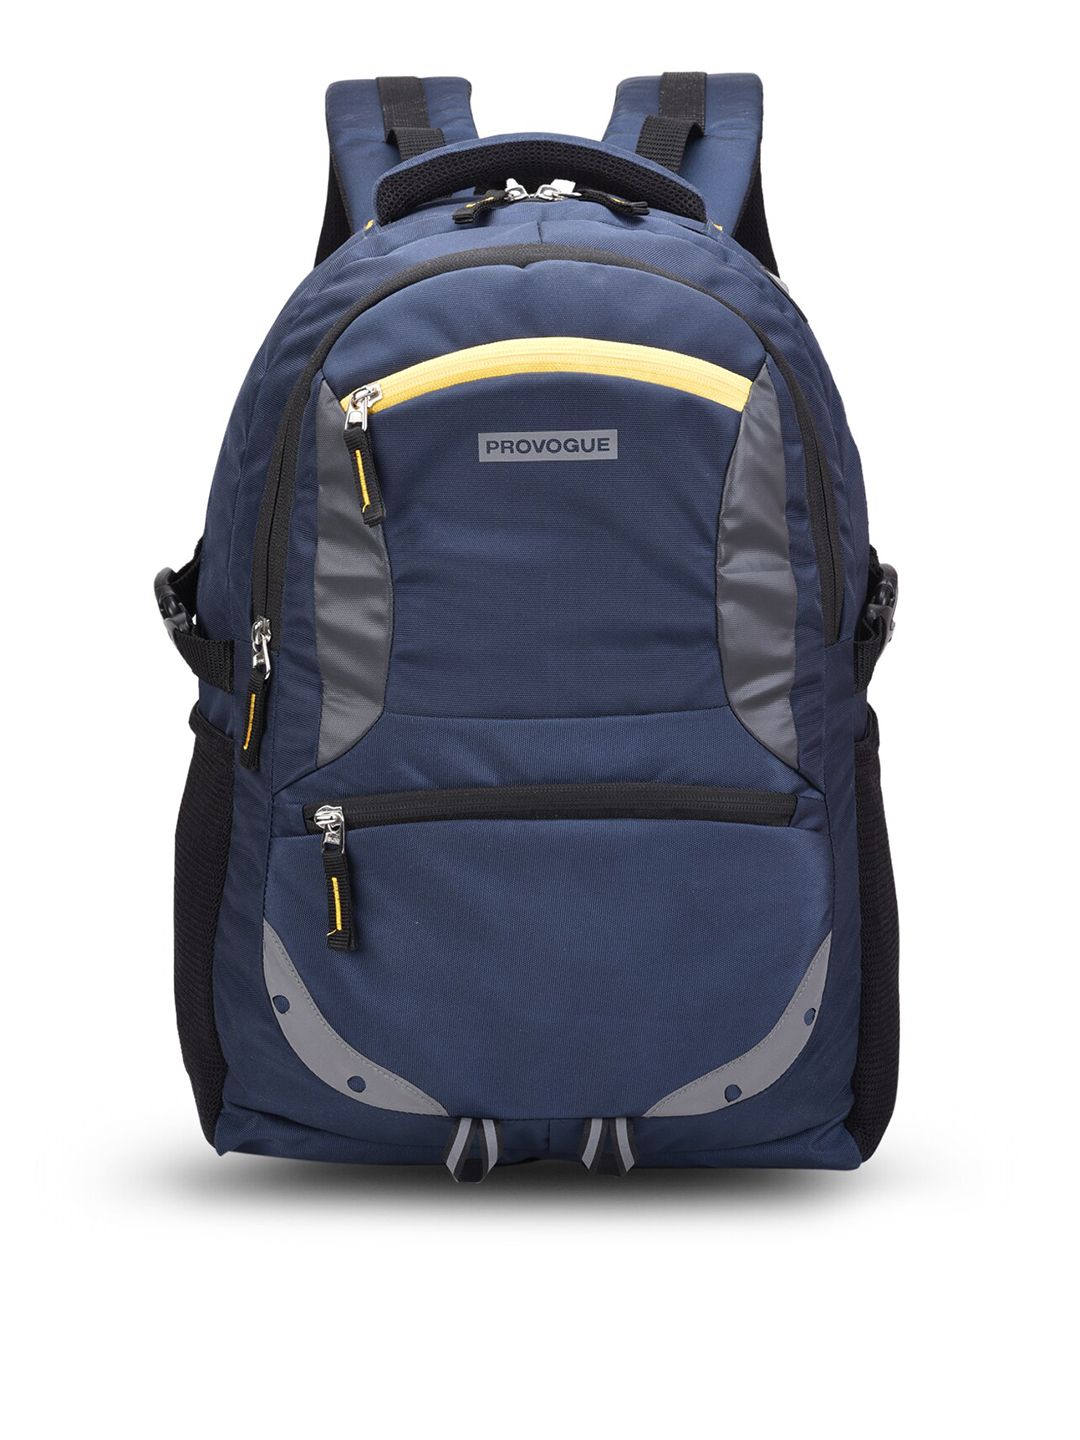 Provogue Unisex Navy Blue Contrast Detail Backpack with Reflective Strip Price in India